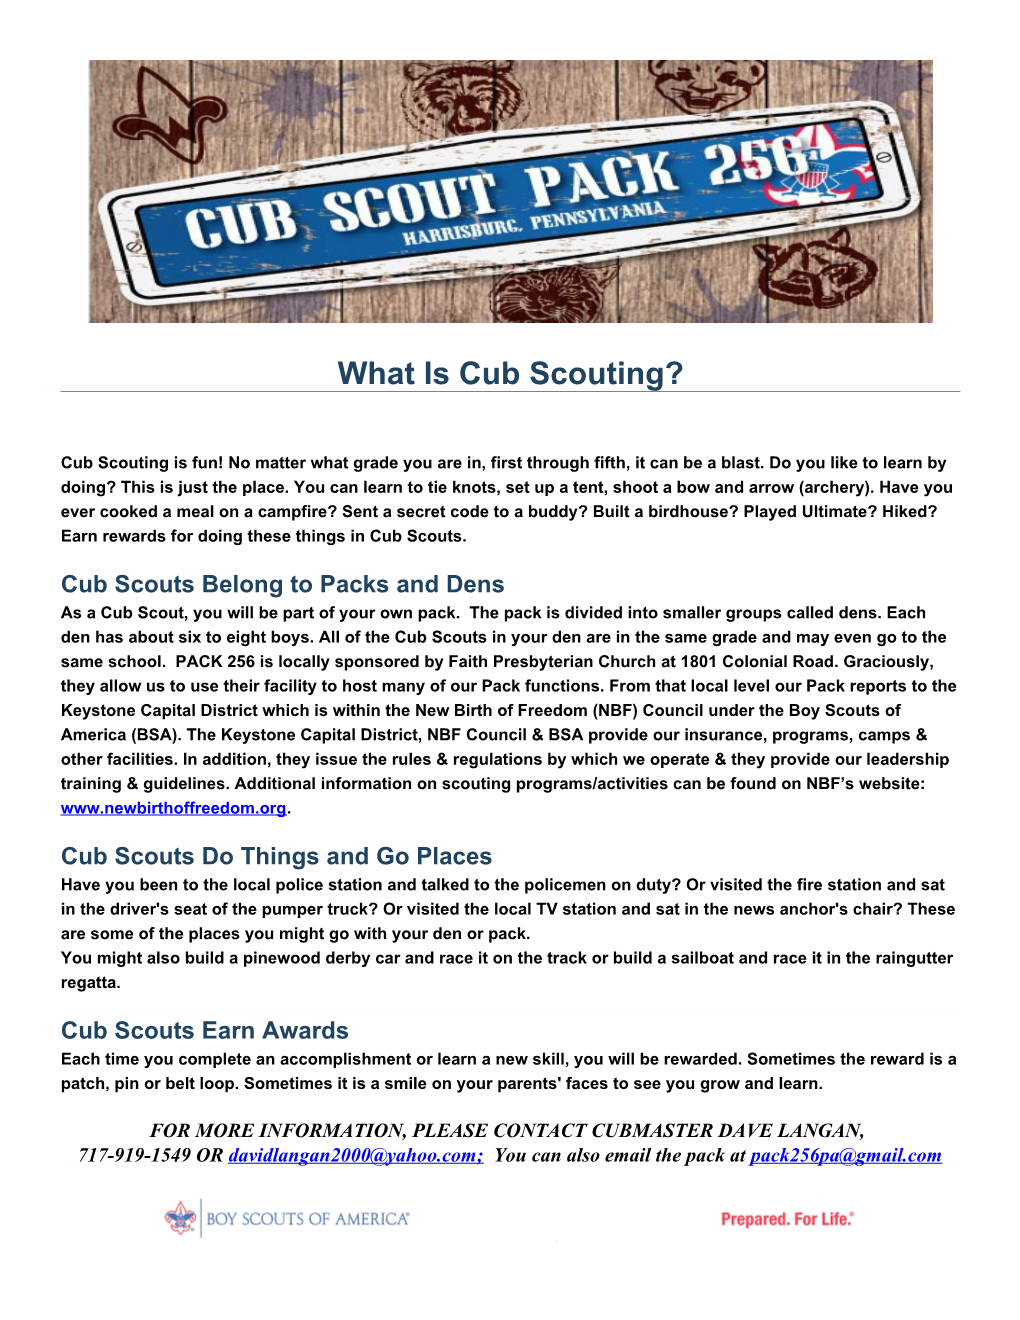 What Is Cub Scouting?